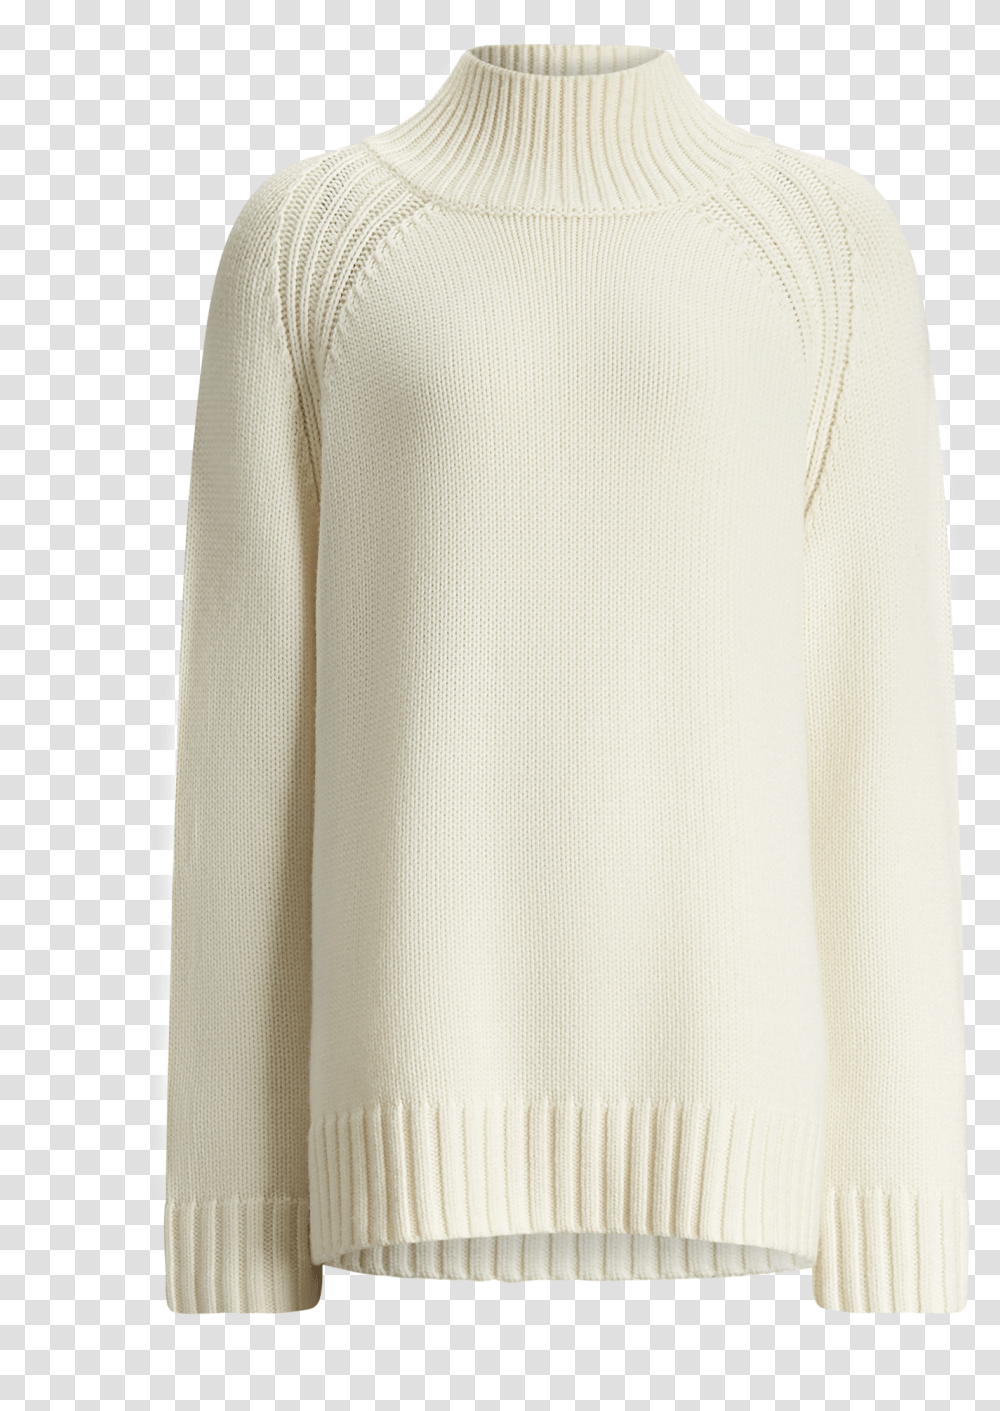 New High Neck Sloppy Joe Knit Sweater, Sleeve, Clothing, Apparel, Long Sleeve Transparent Png